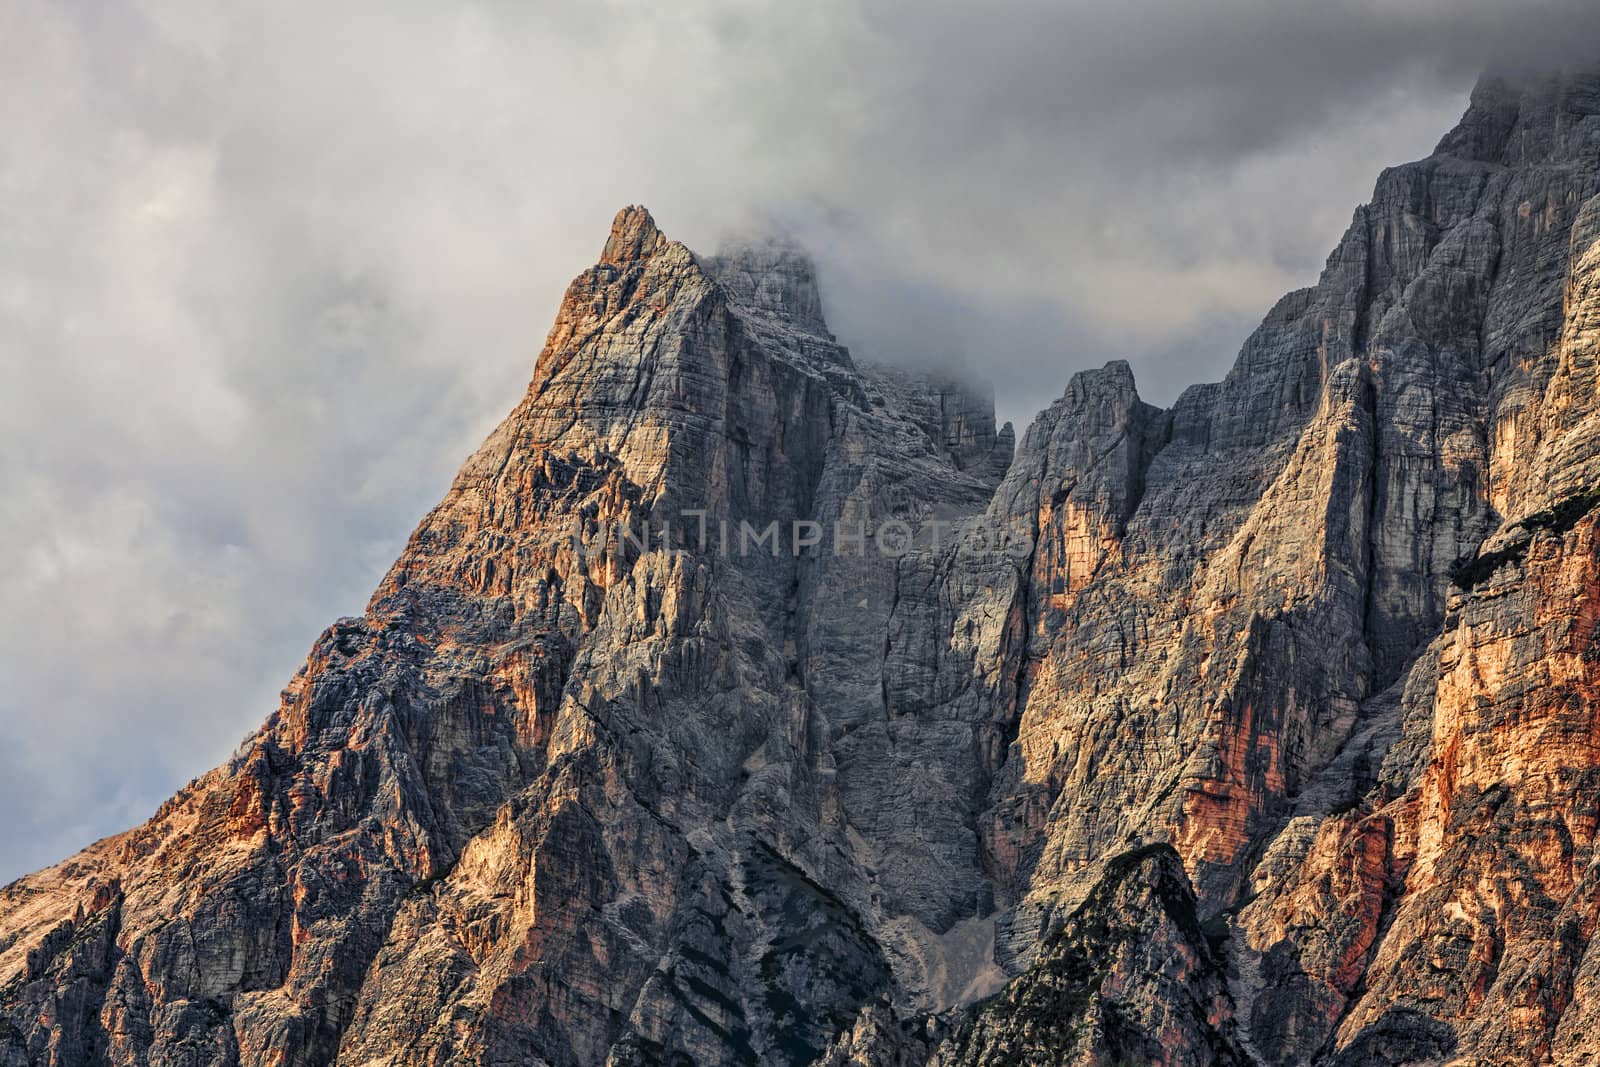 Peaks and Clouds in Dolomites Mountains by RazvanPhotography